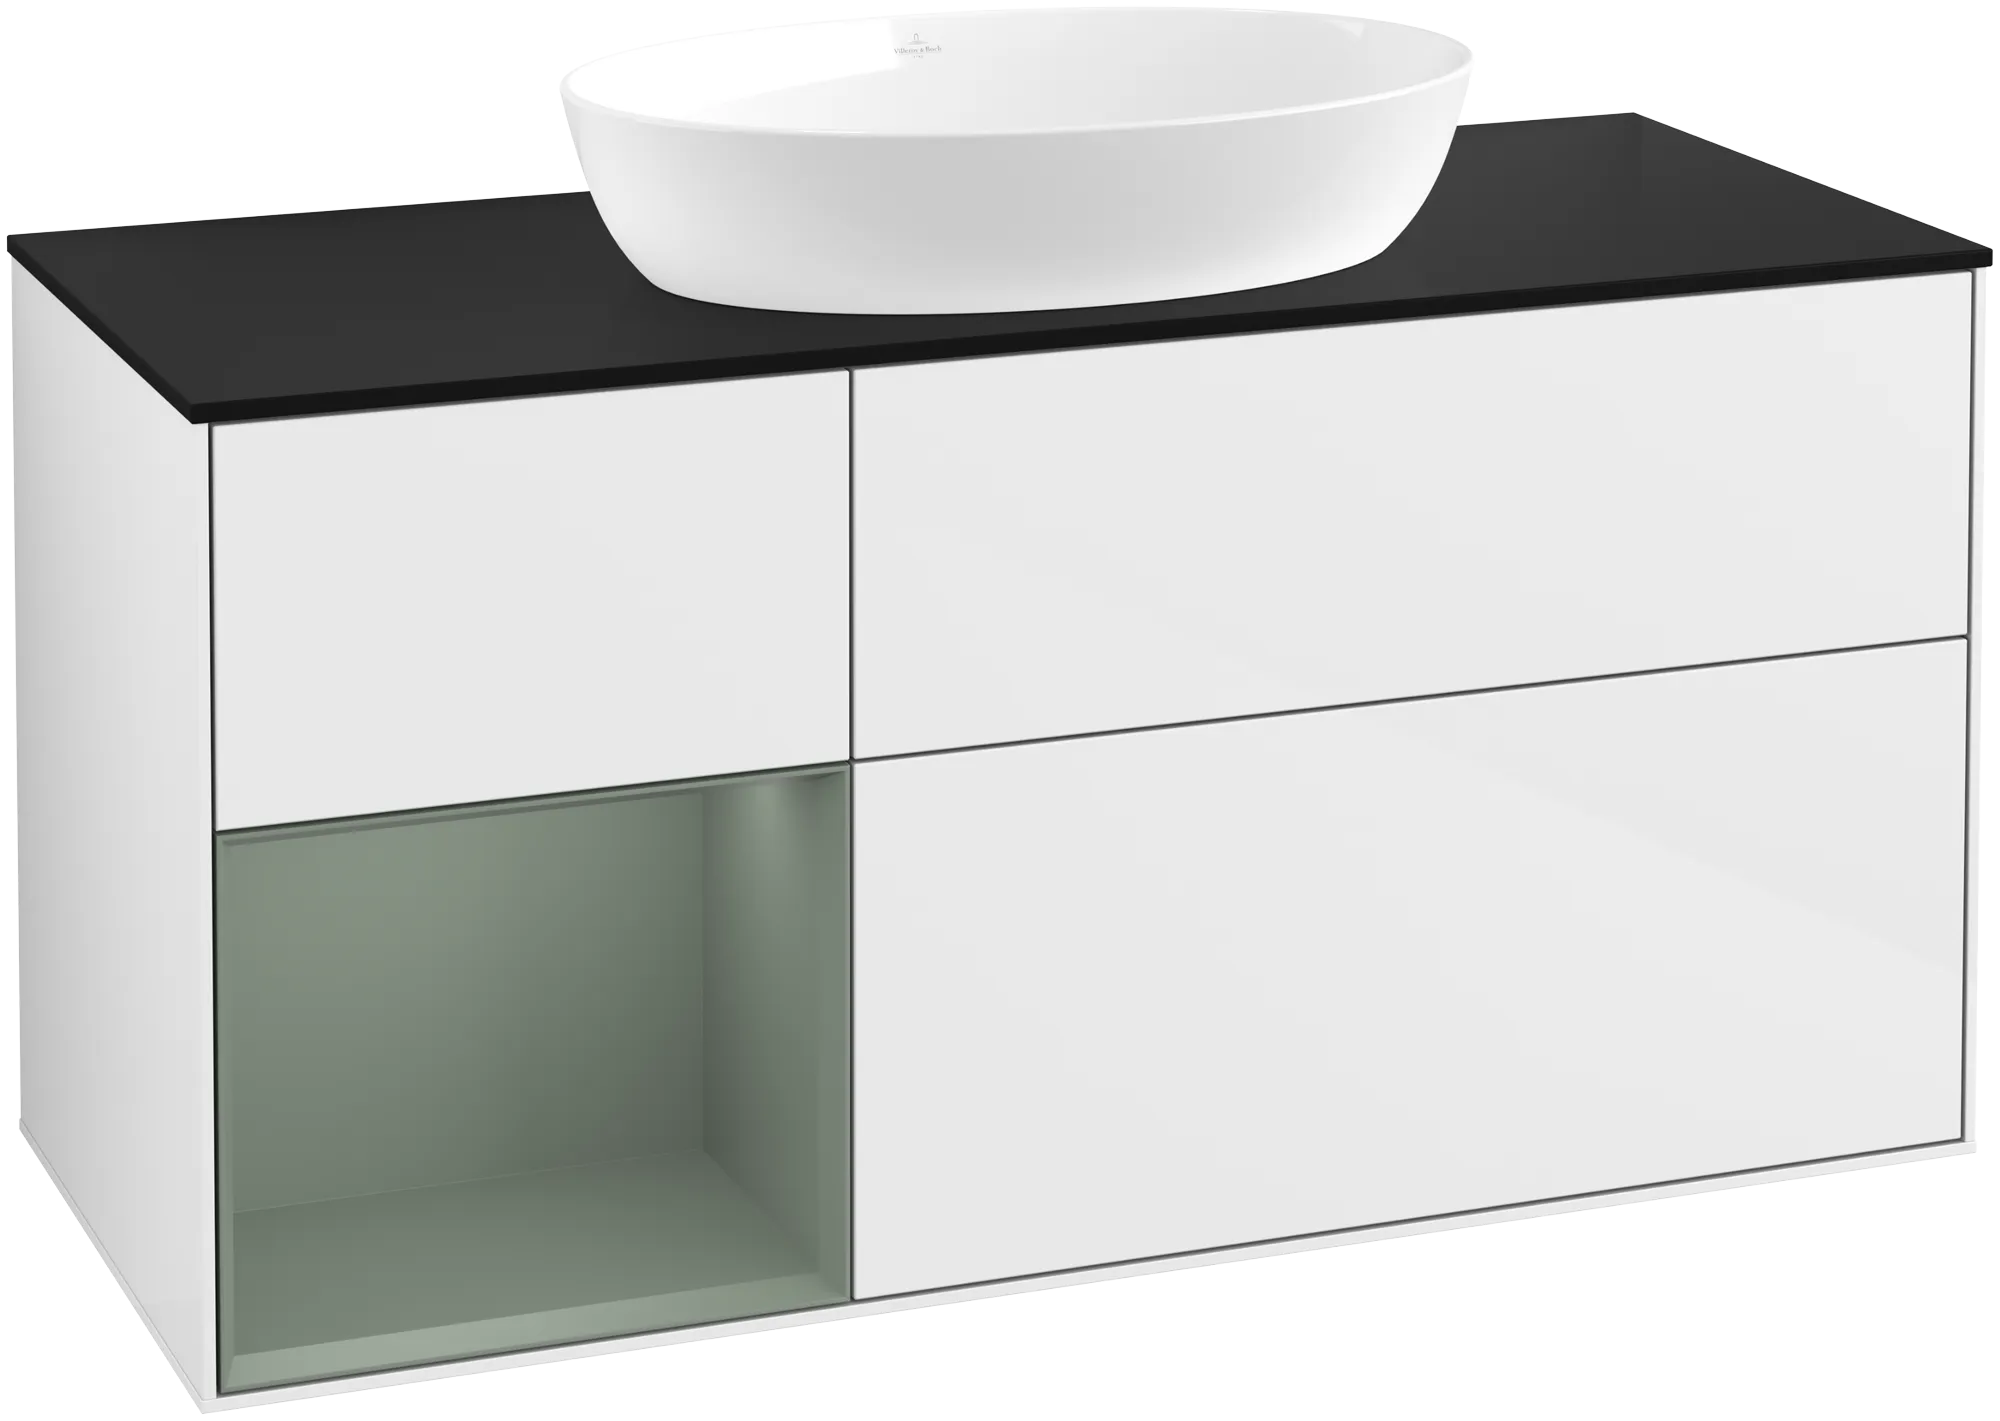 Зображення з  VILLEROY BOCH Finion Vanity unit, with lighting, 3 pull-out compartments, 1200 x 603 x 501 mm, Glossy White Lacquer / Olive Matt Lacquer / Glass Black Matt #GA62GMGF